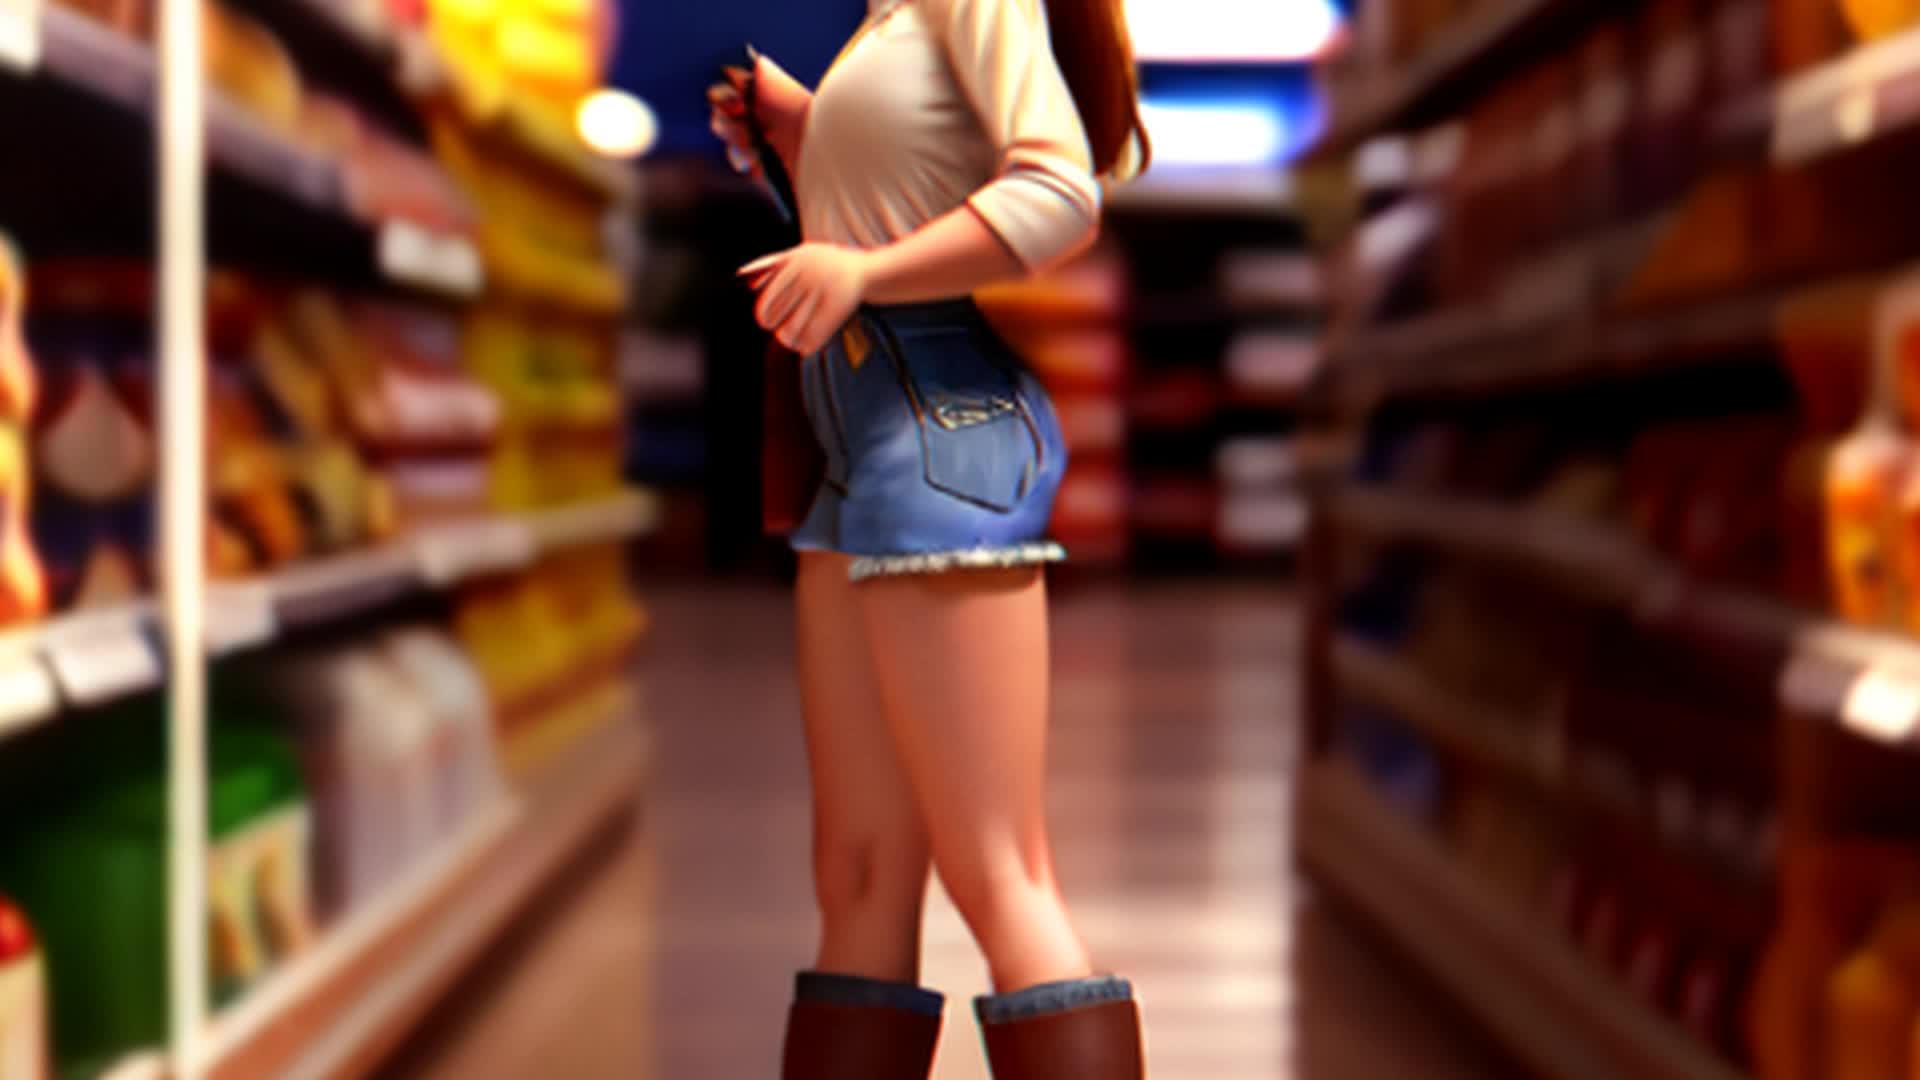 Woman in ripped denim shorts, thigh-high boots, bending down in grocery aisle, man in silk shirt, cowboy boots, eyeing her, detailed, sharp focus, natural lighting